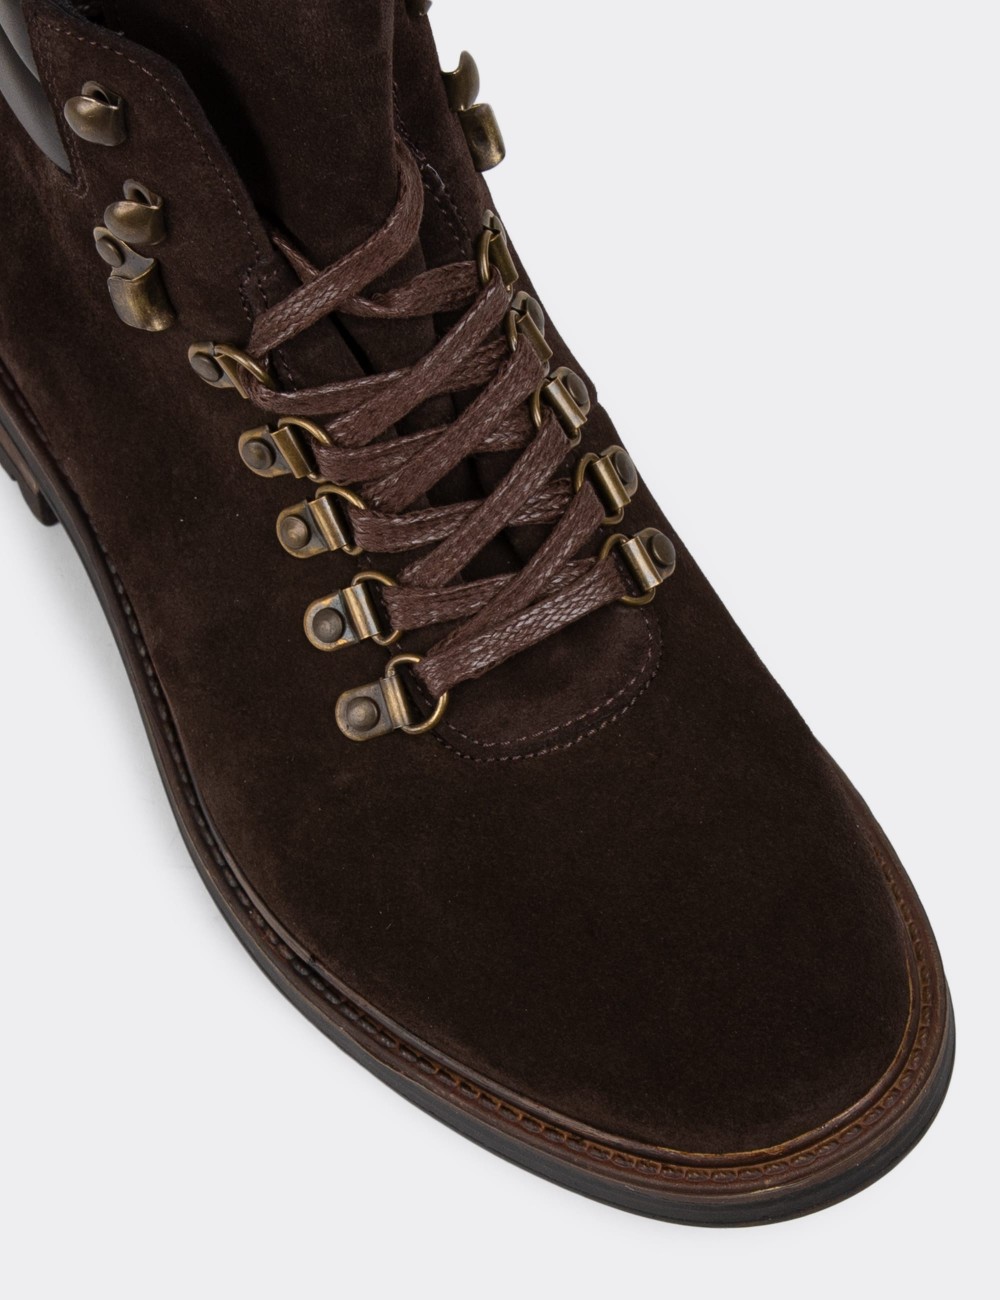 Brown Suede Leather Boots - 01923MKHVC01